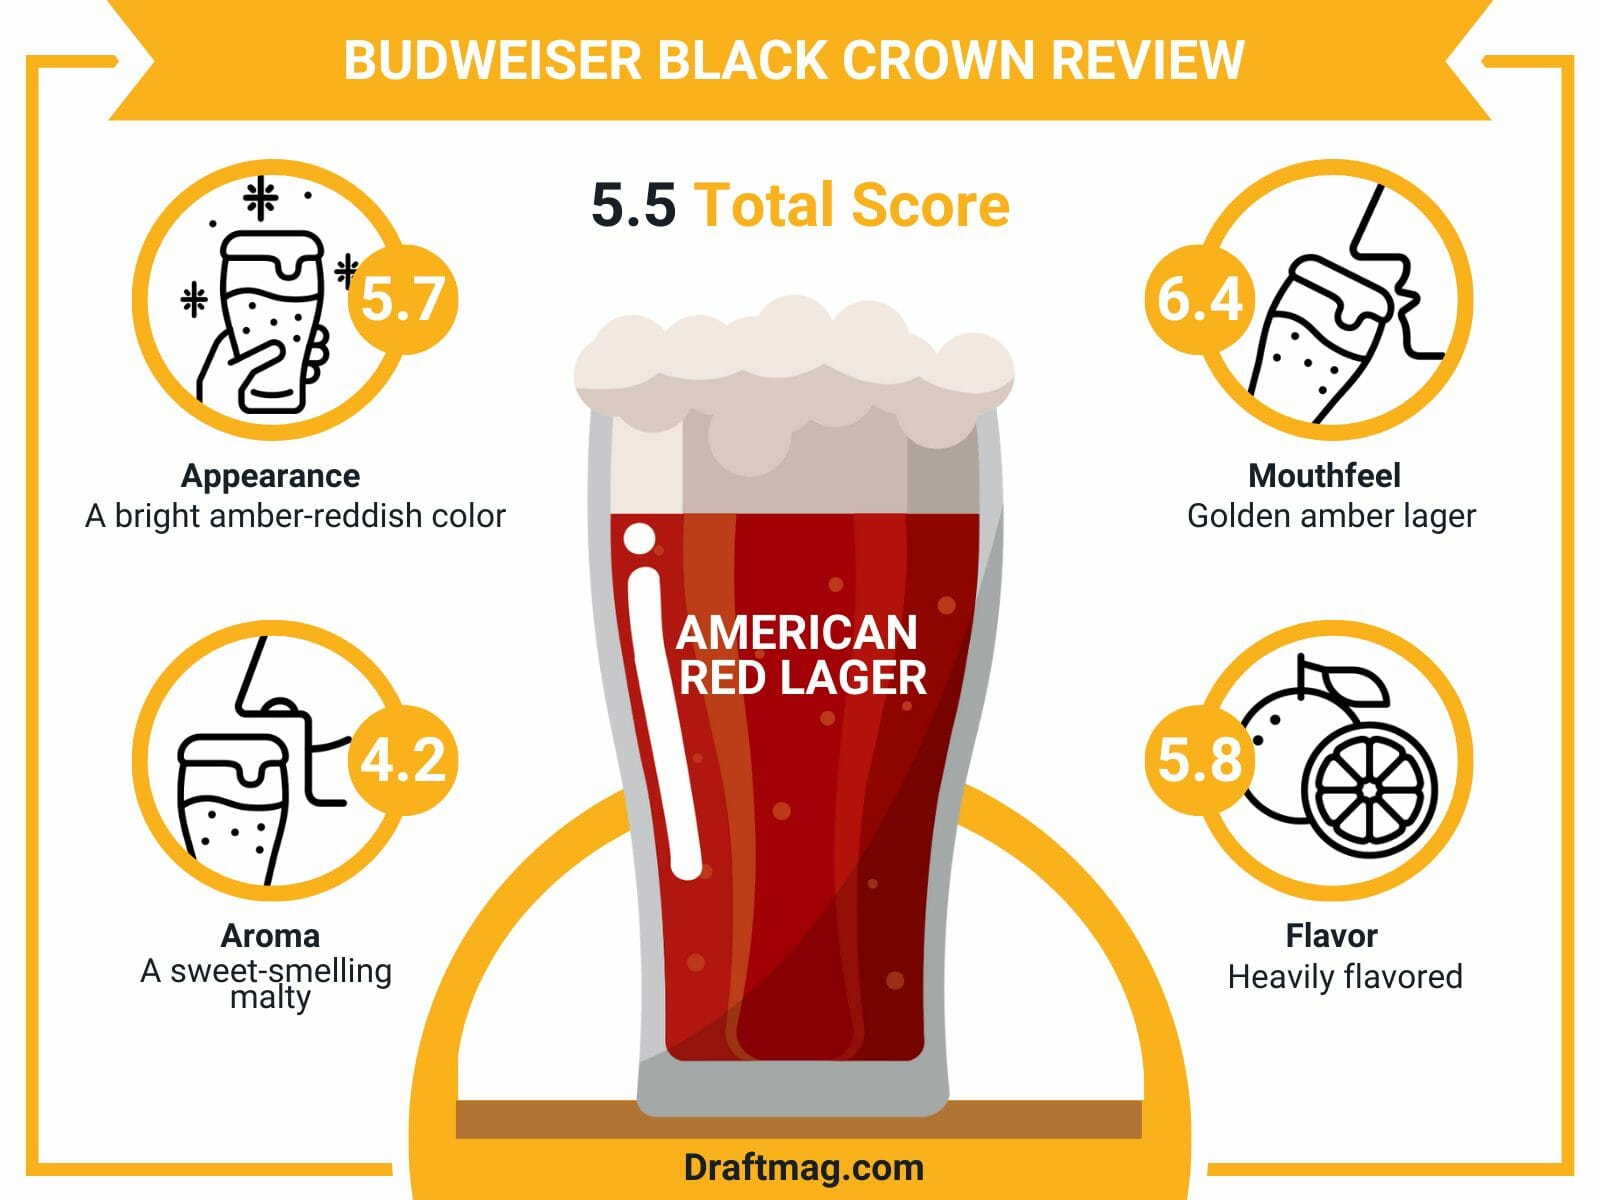 Budweiser black crown review infographic